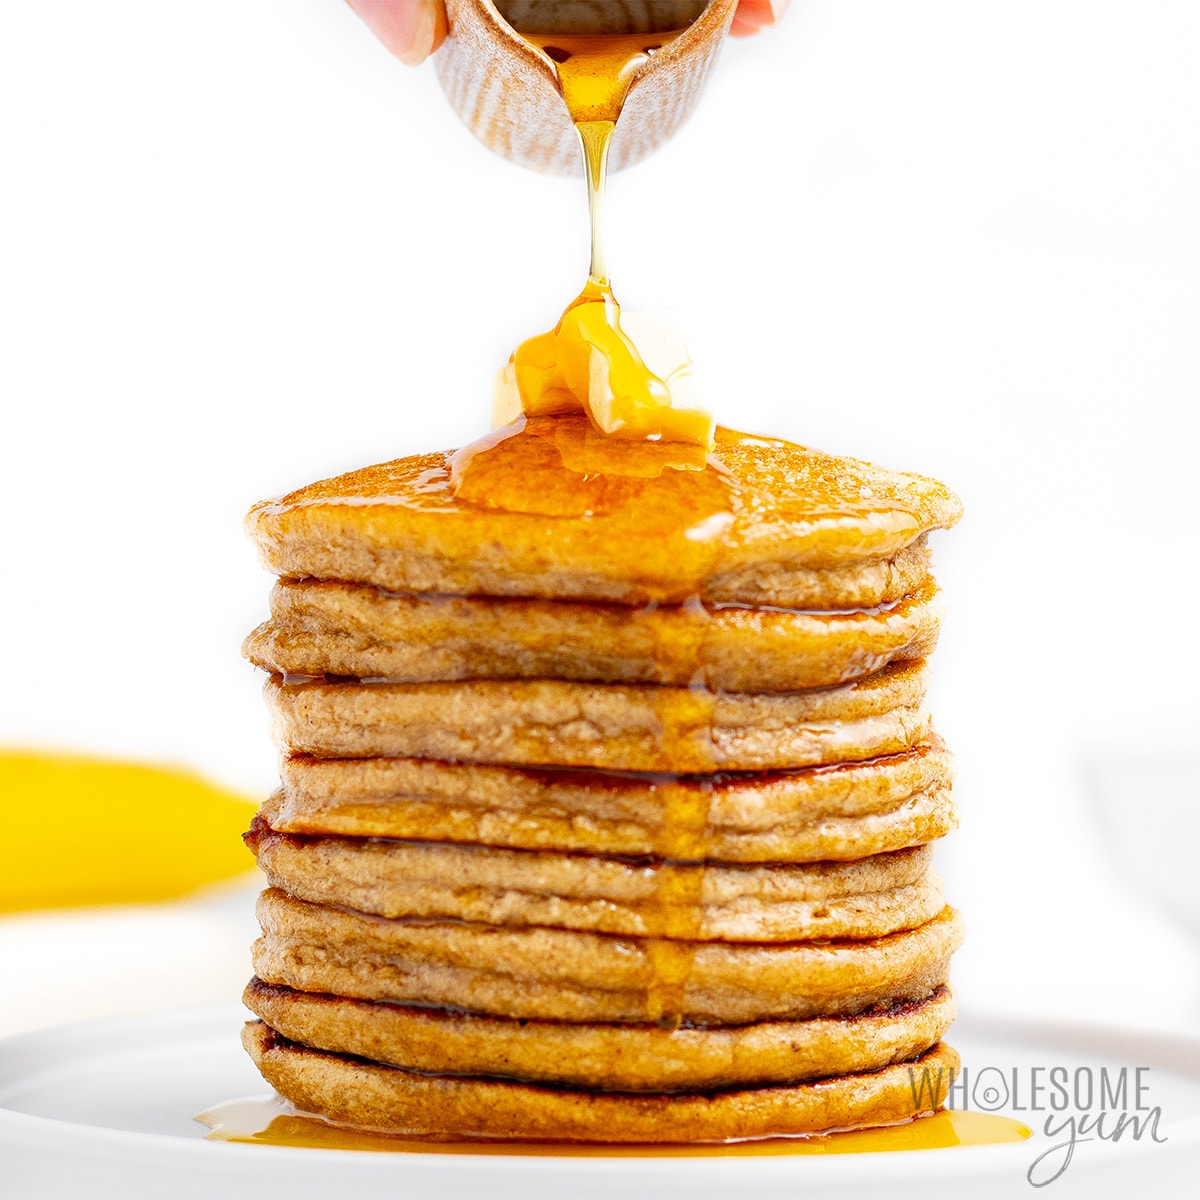 Banana oat pancakes stacked with syrup drizzle.